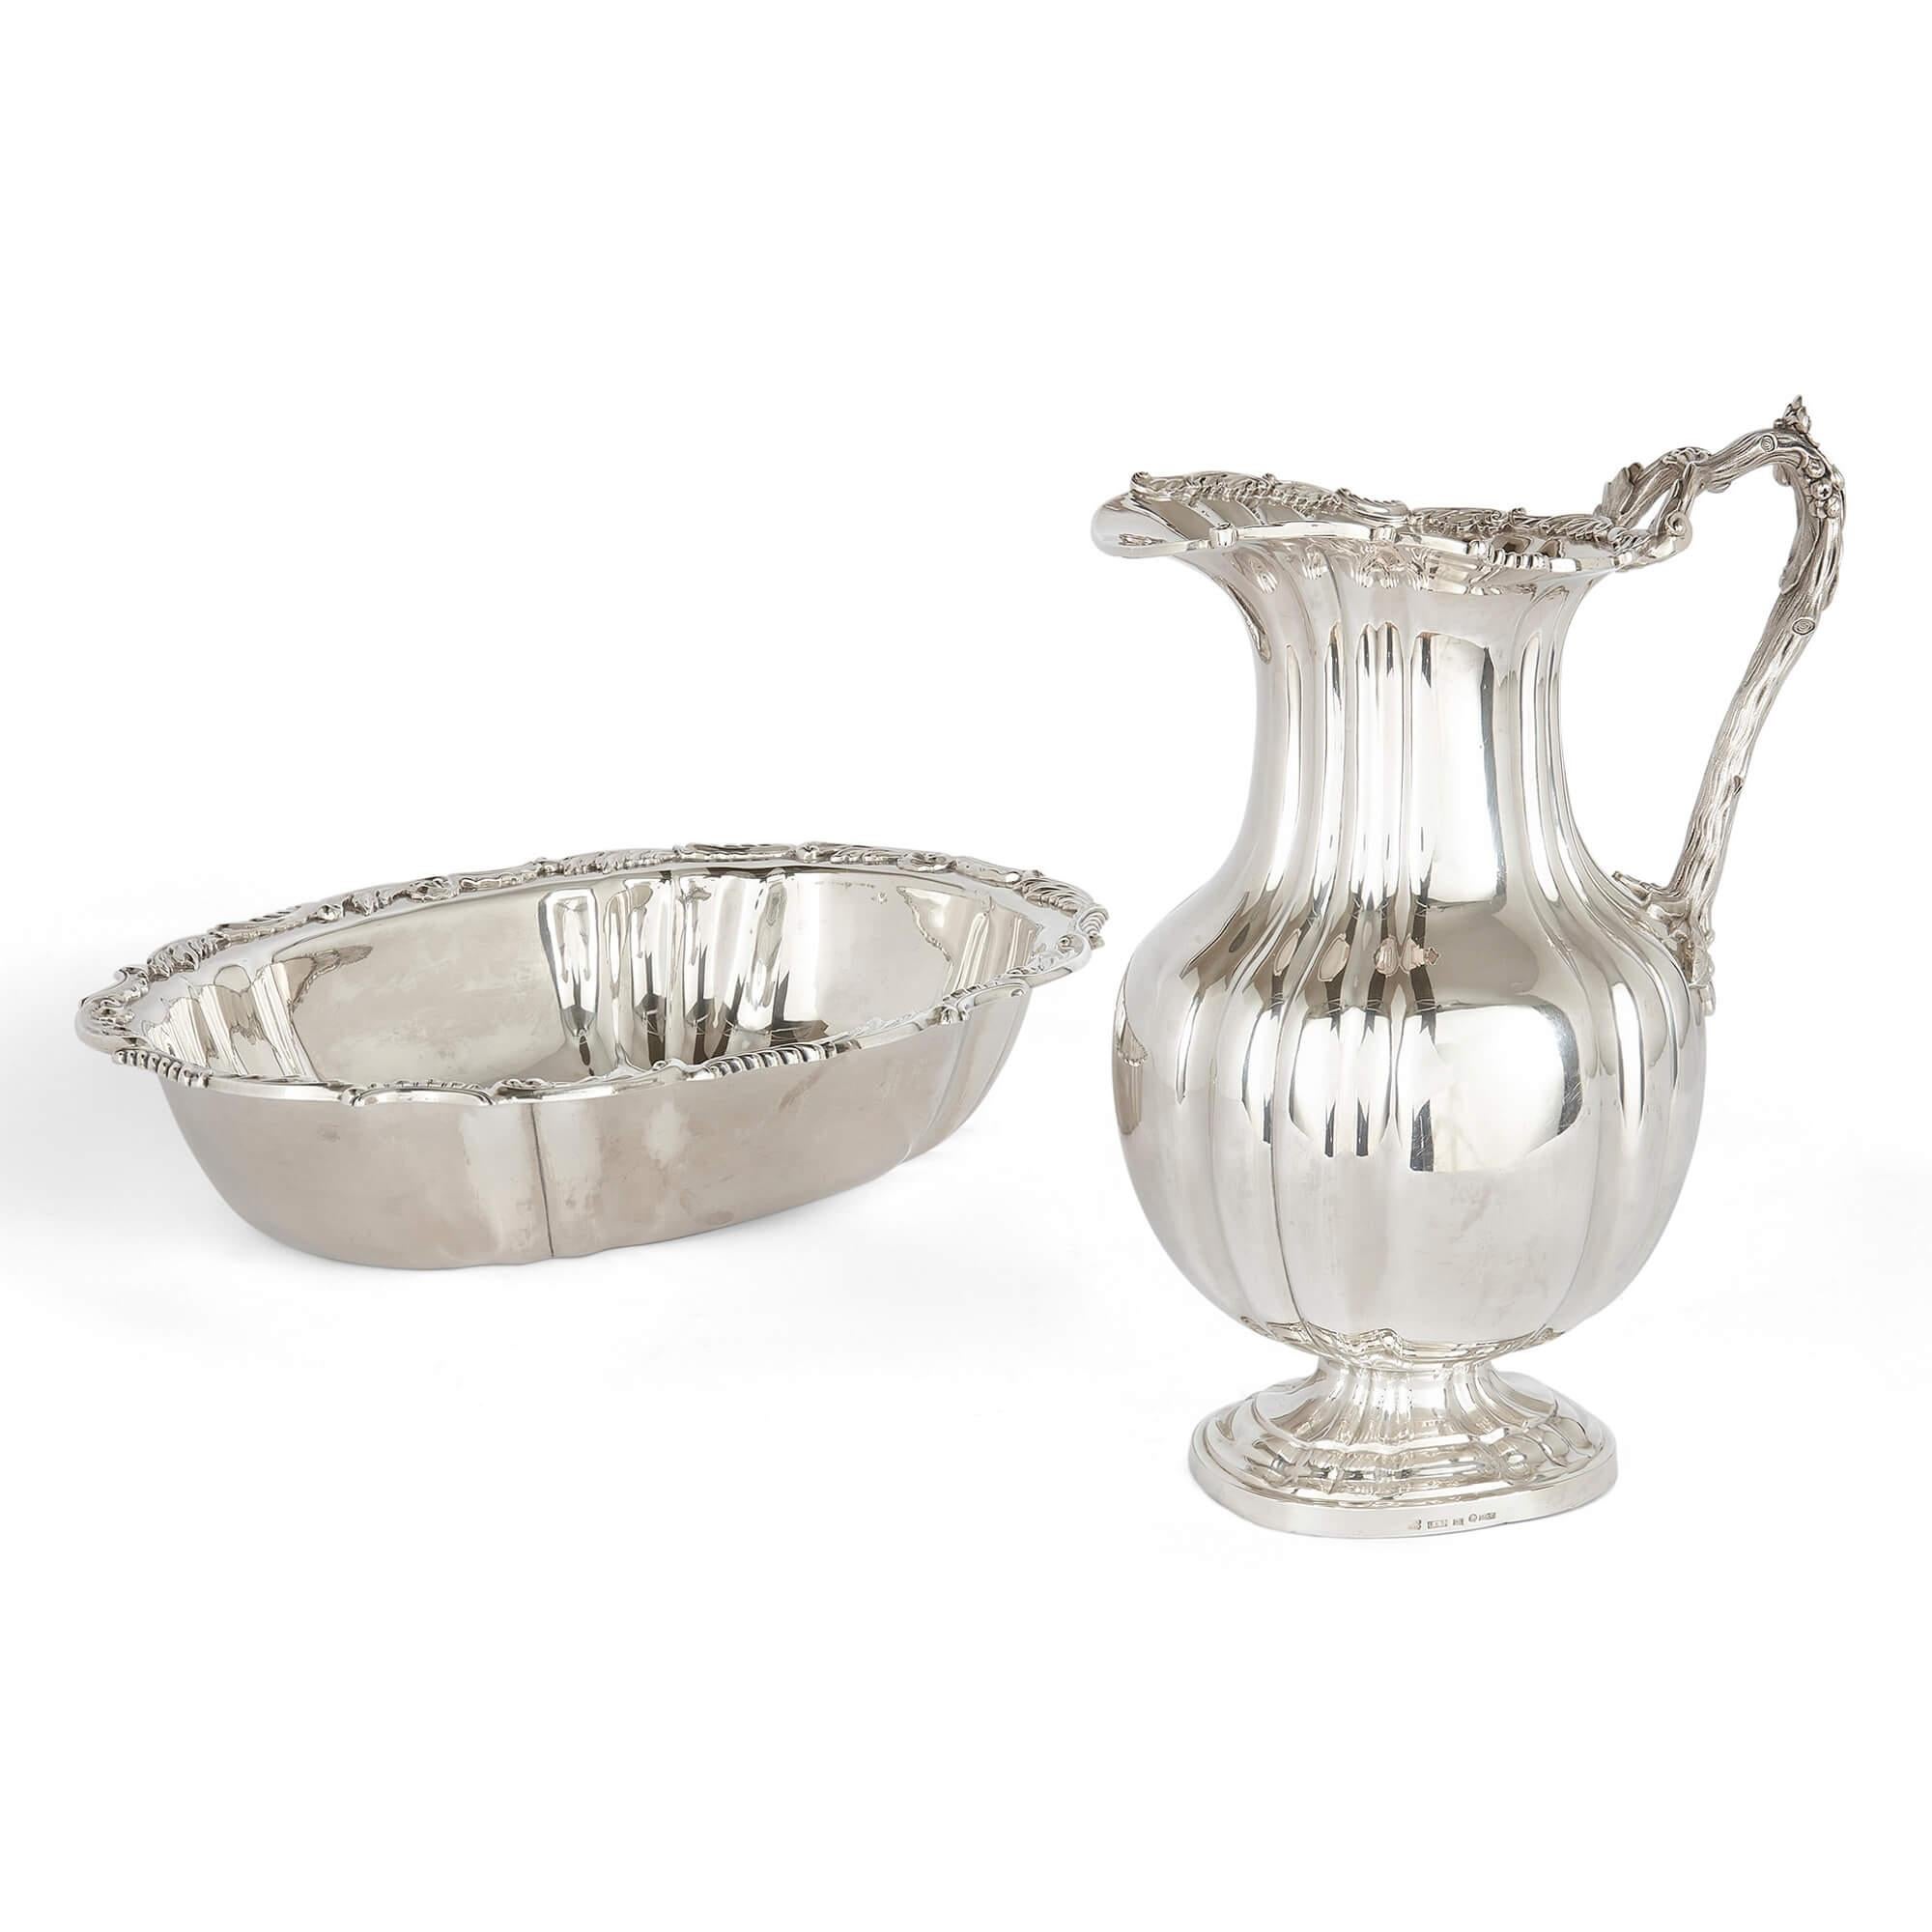 Early Russian silver ewer and basin set by Lang
Russian, 1838-9
Jug: Height 9cm, width 21cm, depth 15cm 
Basin:  Height 8cm, width 39cm, depth 29.5cm

Emerging from the early 19th Century Nicholas I era, this exceptional pair of a basin and ewer, is